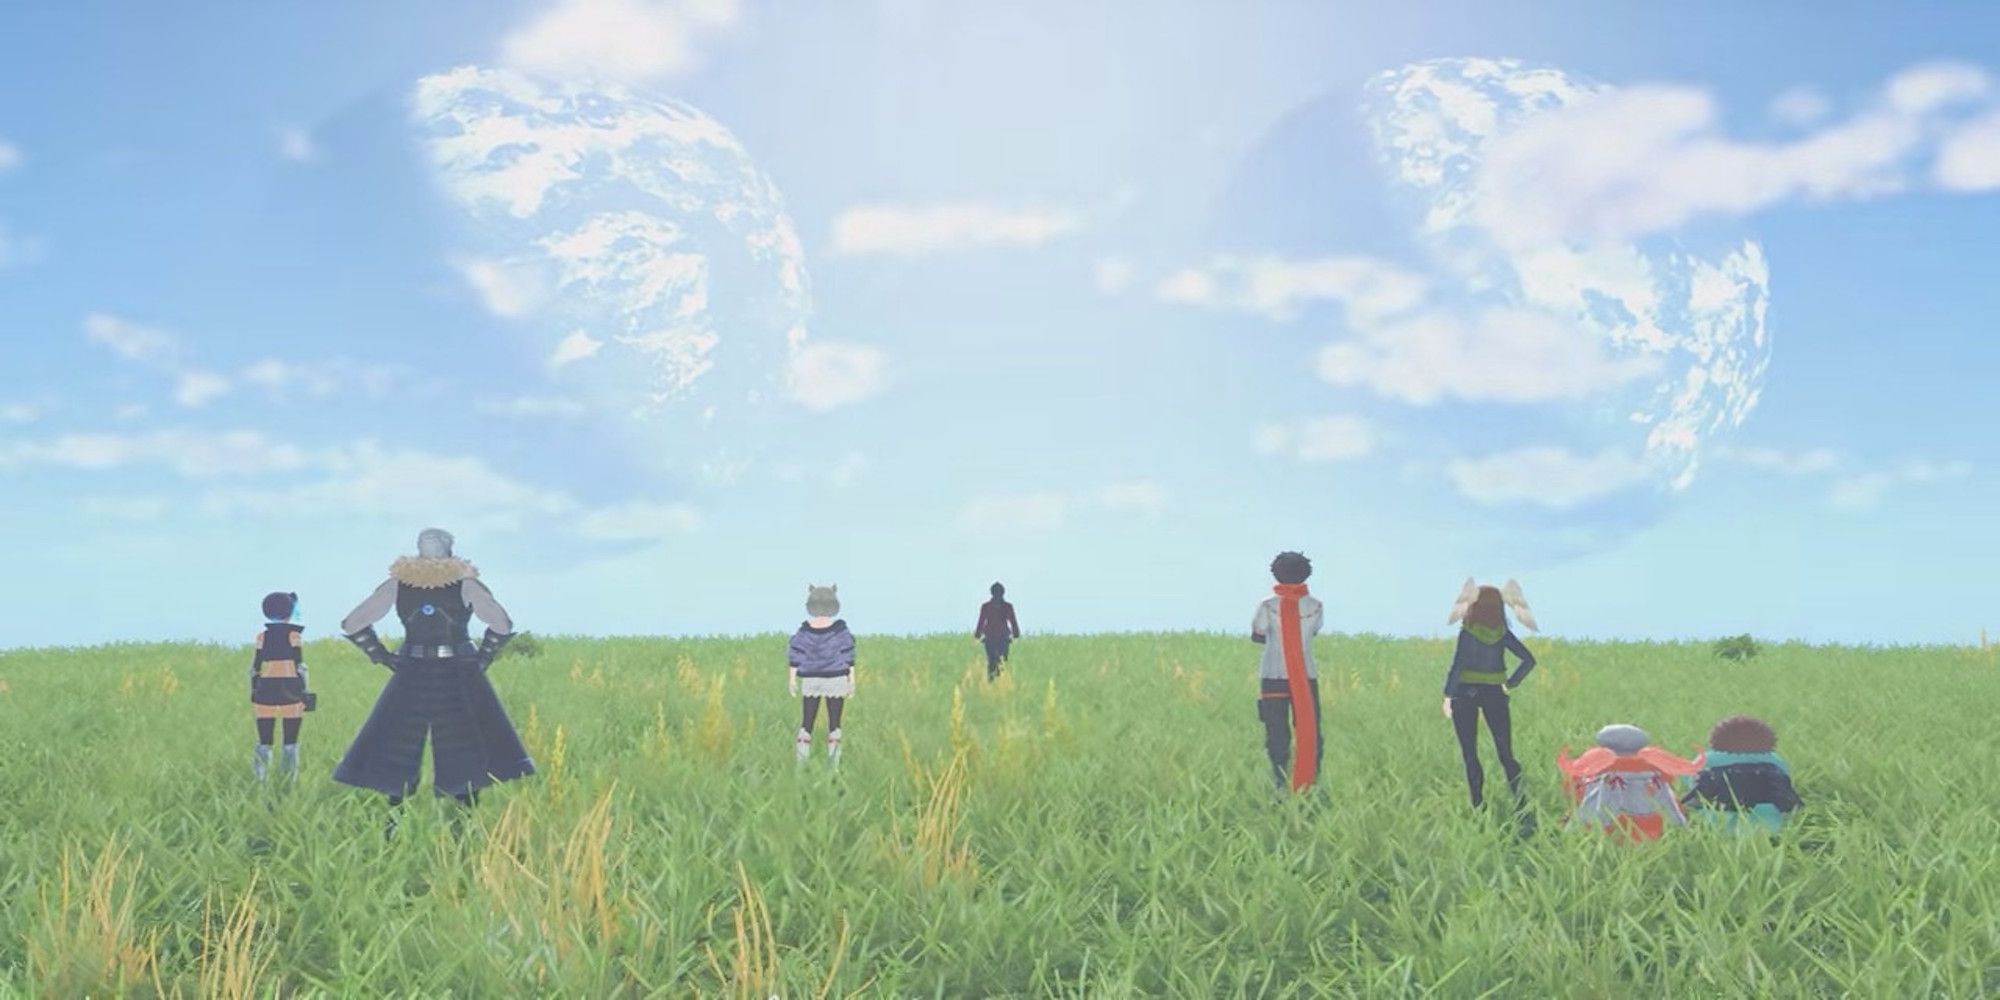 A cutscene featuring characters in Xenoblade Chronicles 3